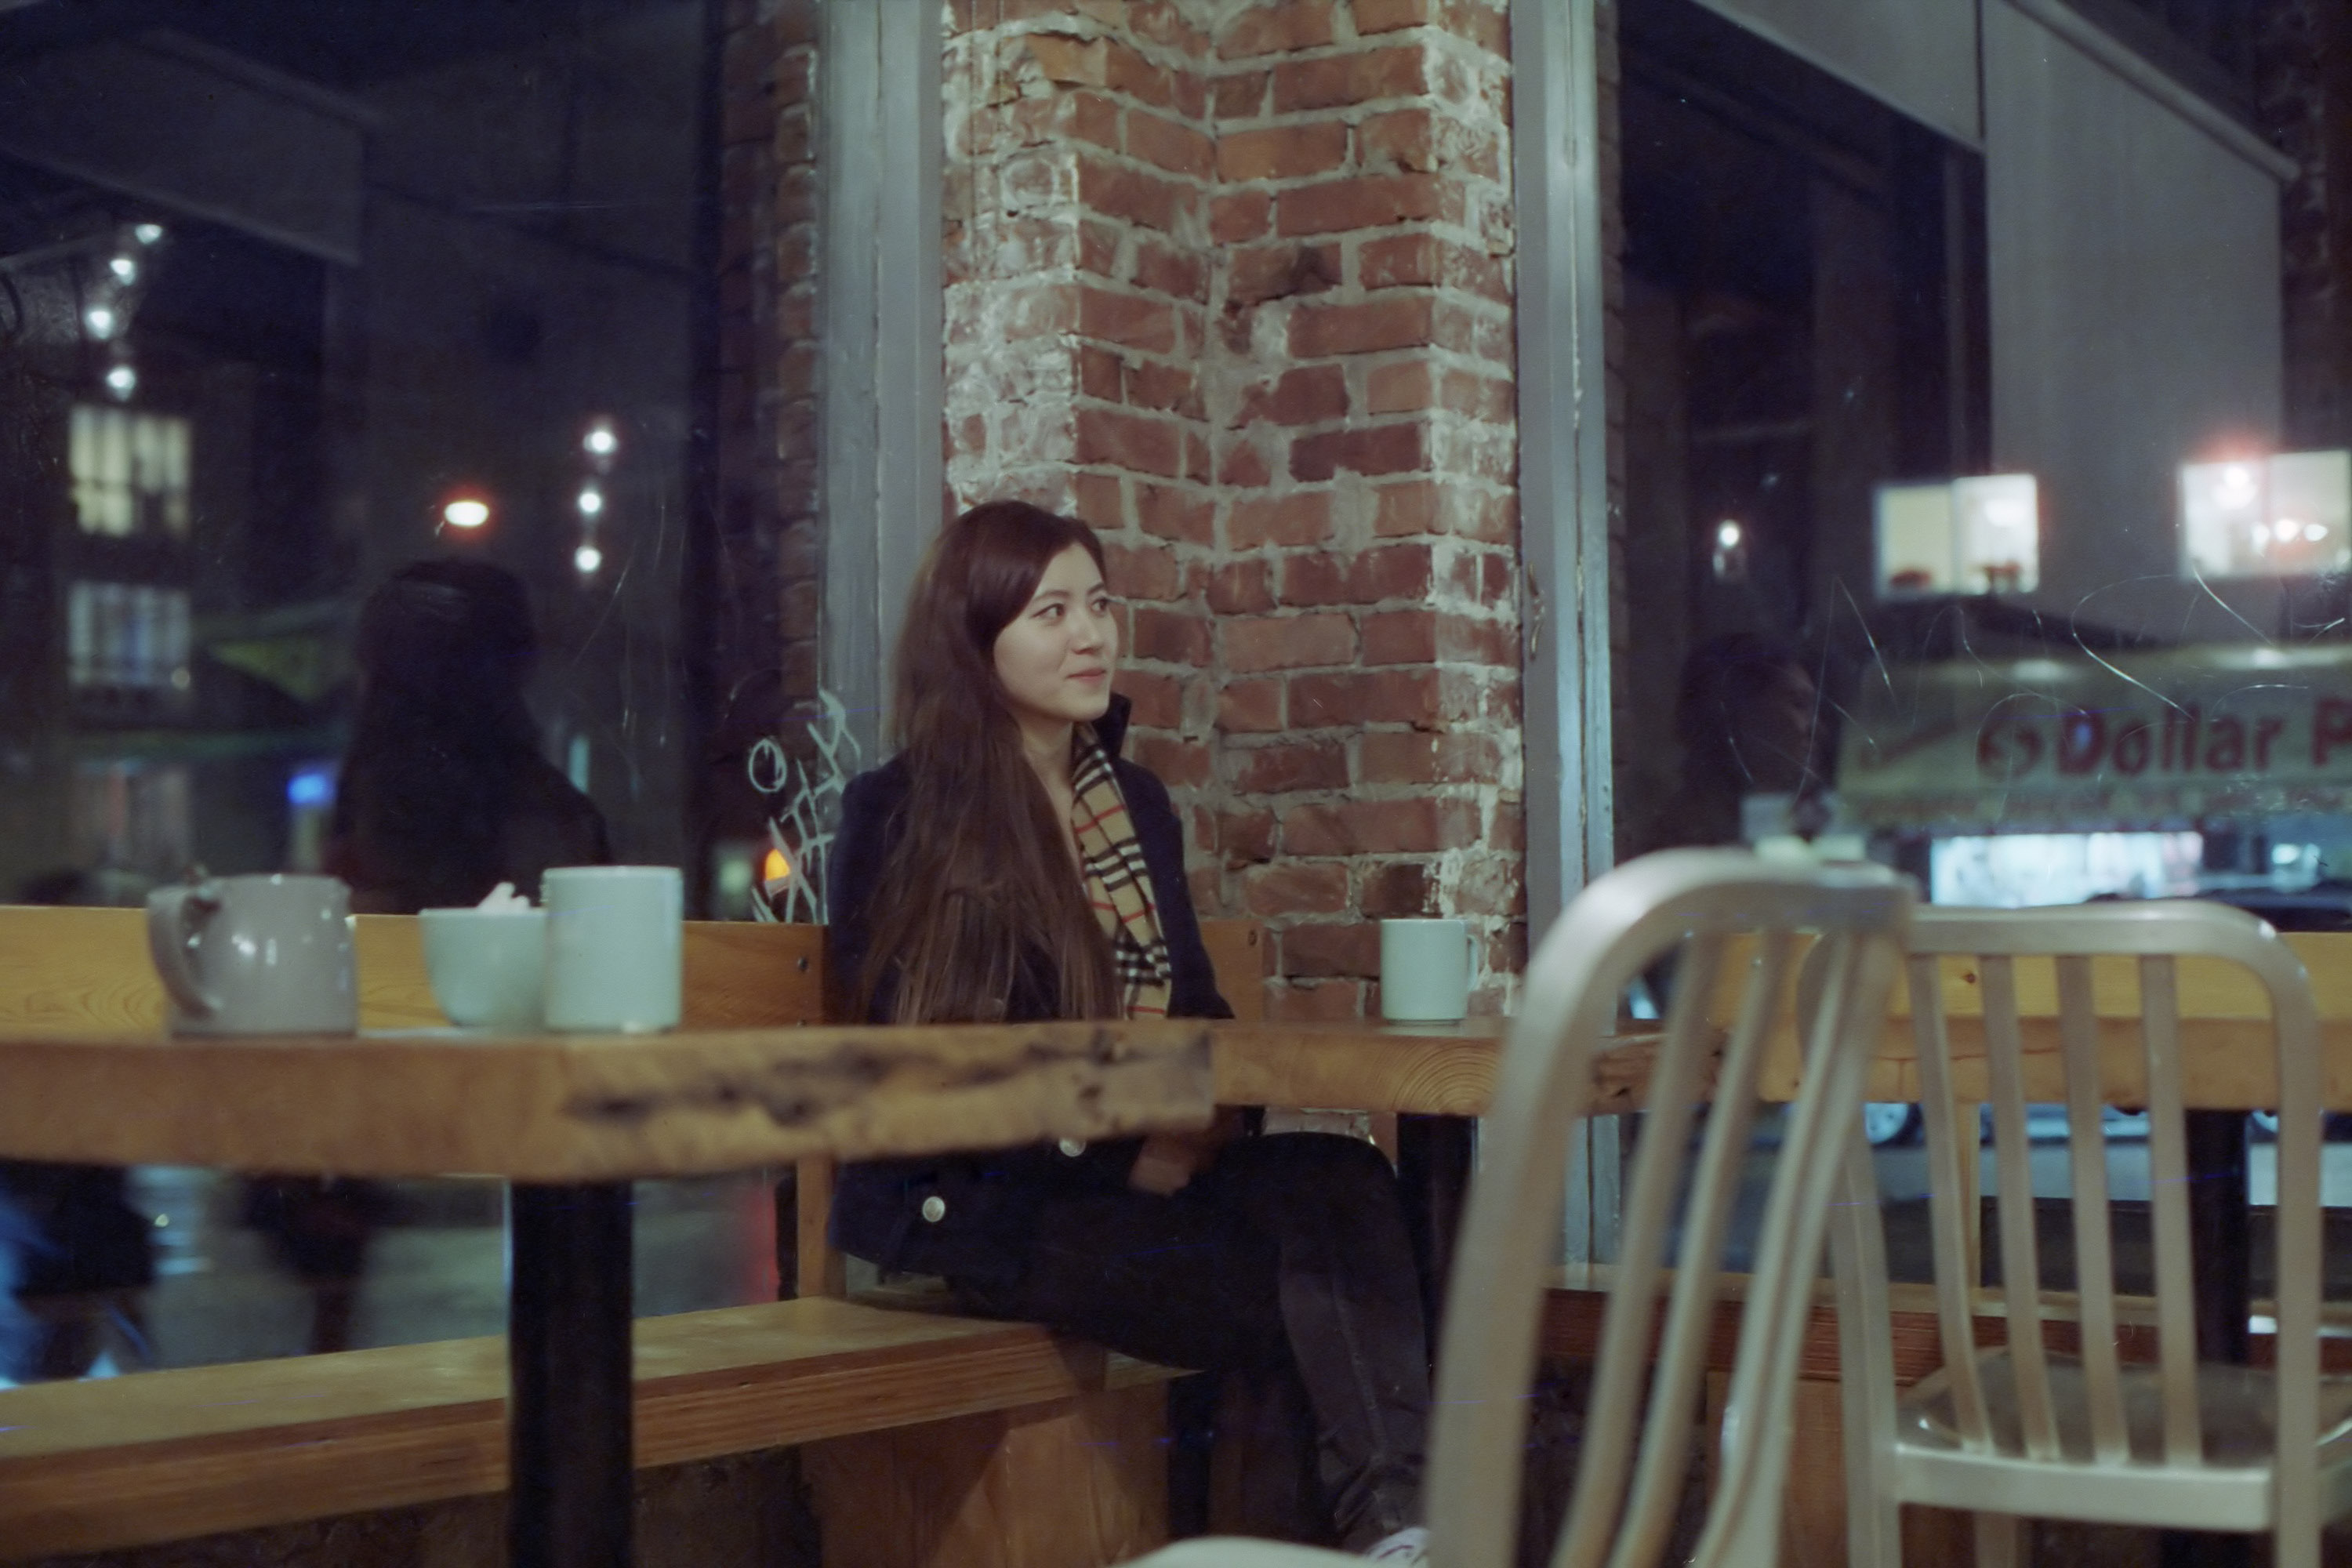 Smirking at a cafe photo